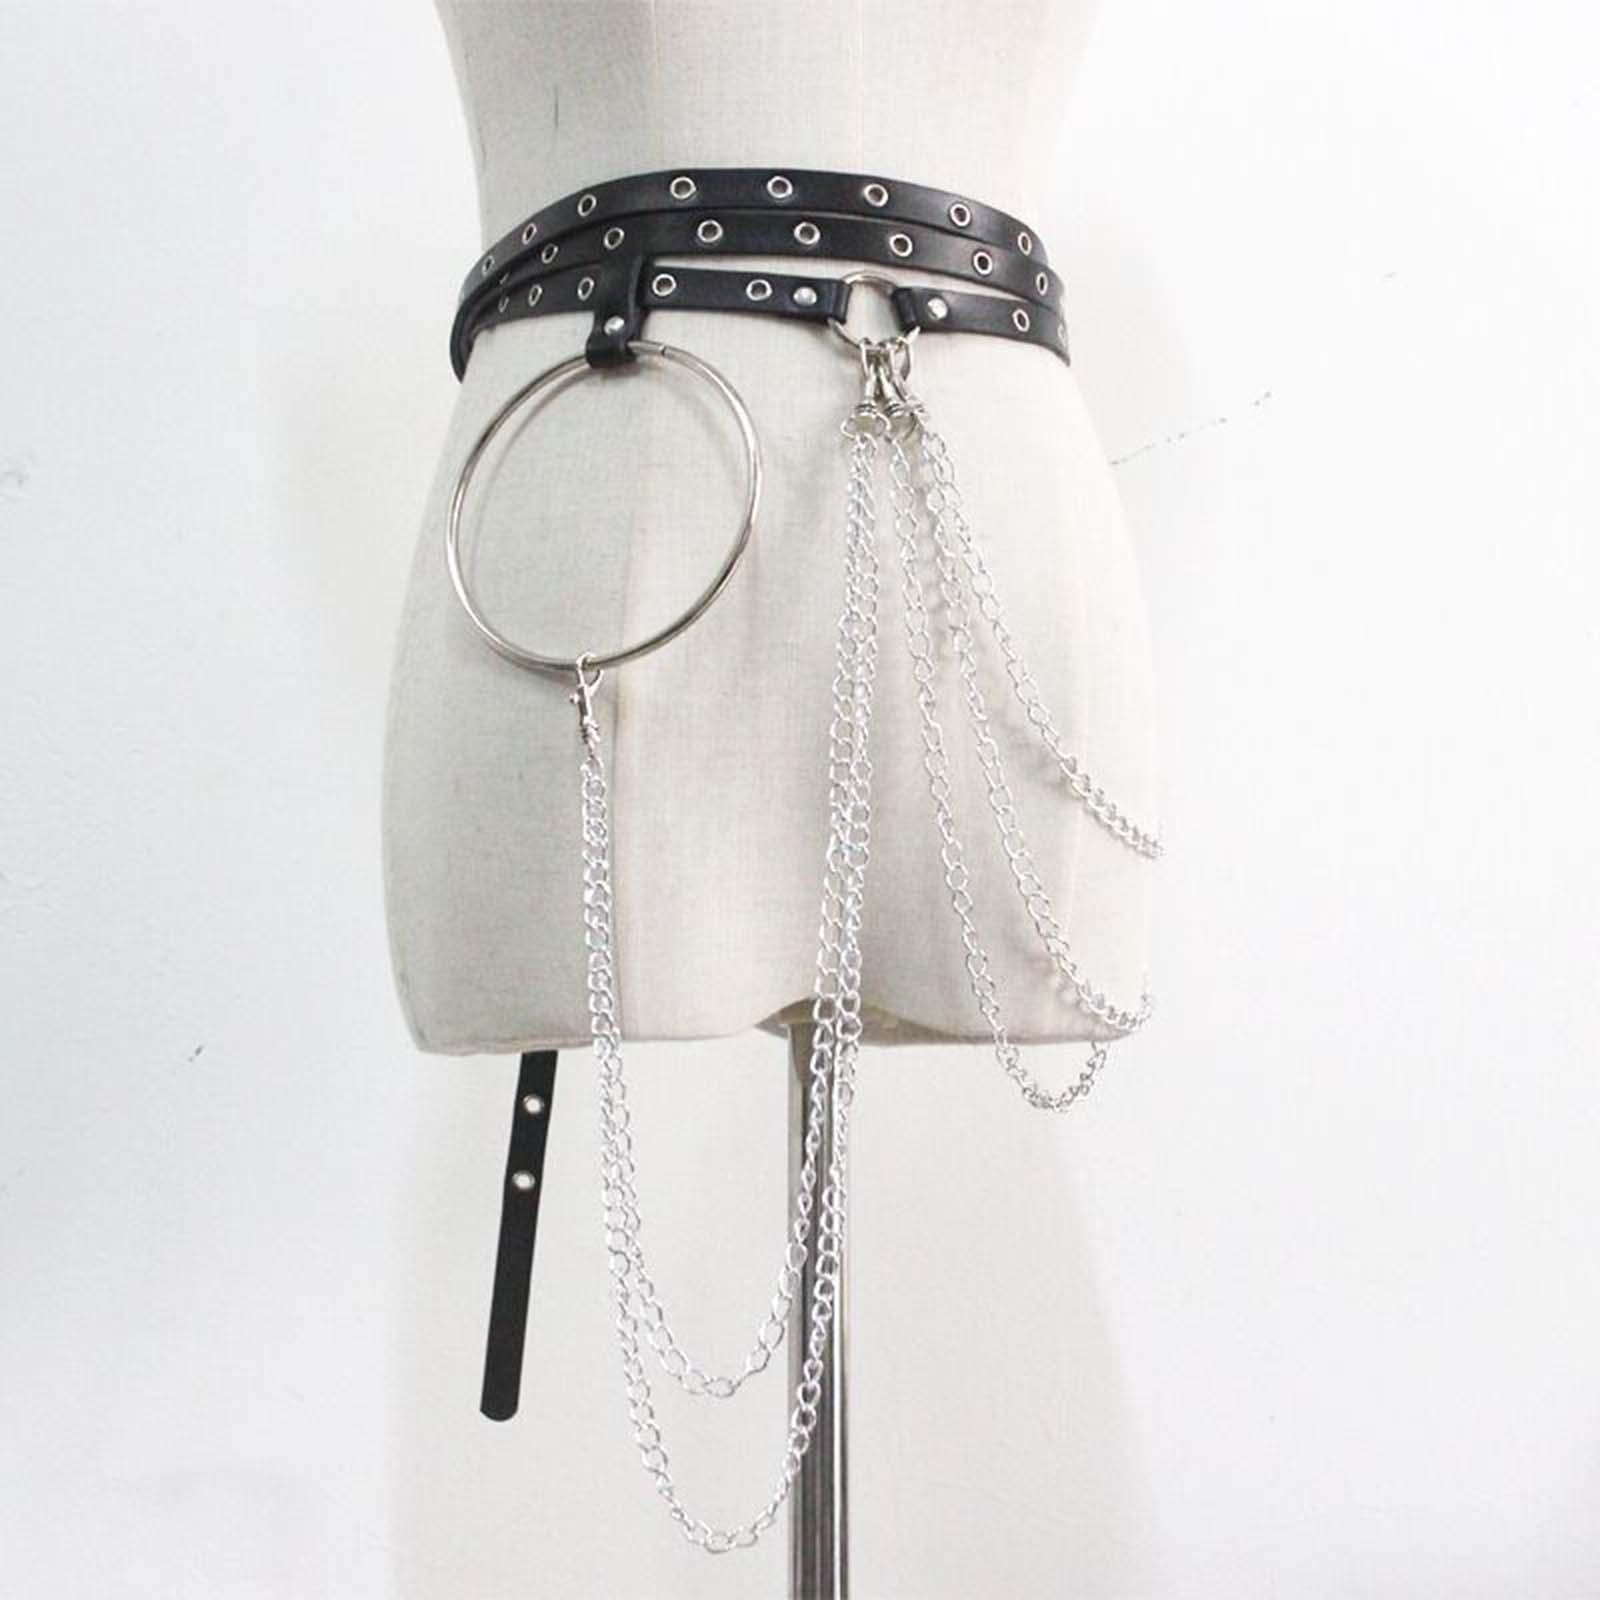 Punk Style Women's PU Leather Harness Body Chains Metal Chain Tassel , Highlight Your Daily or Cosplay Outfit